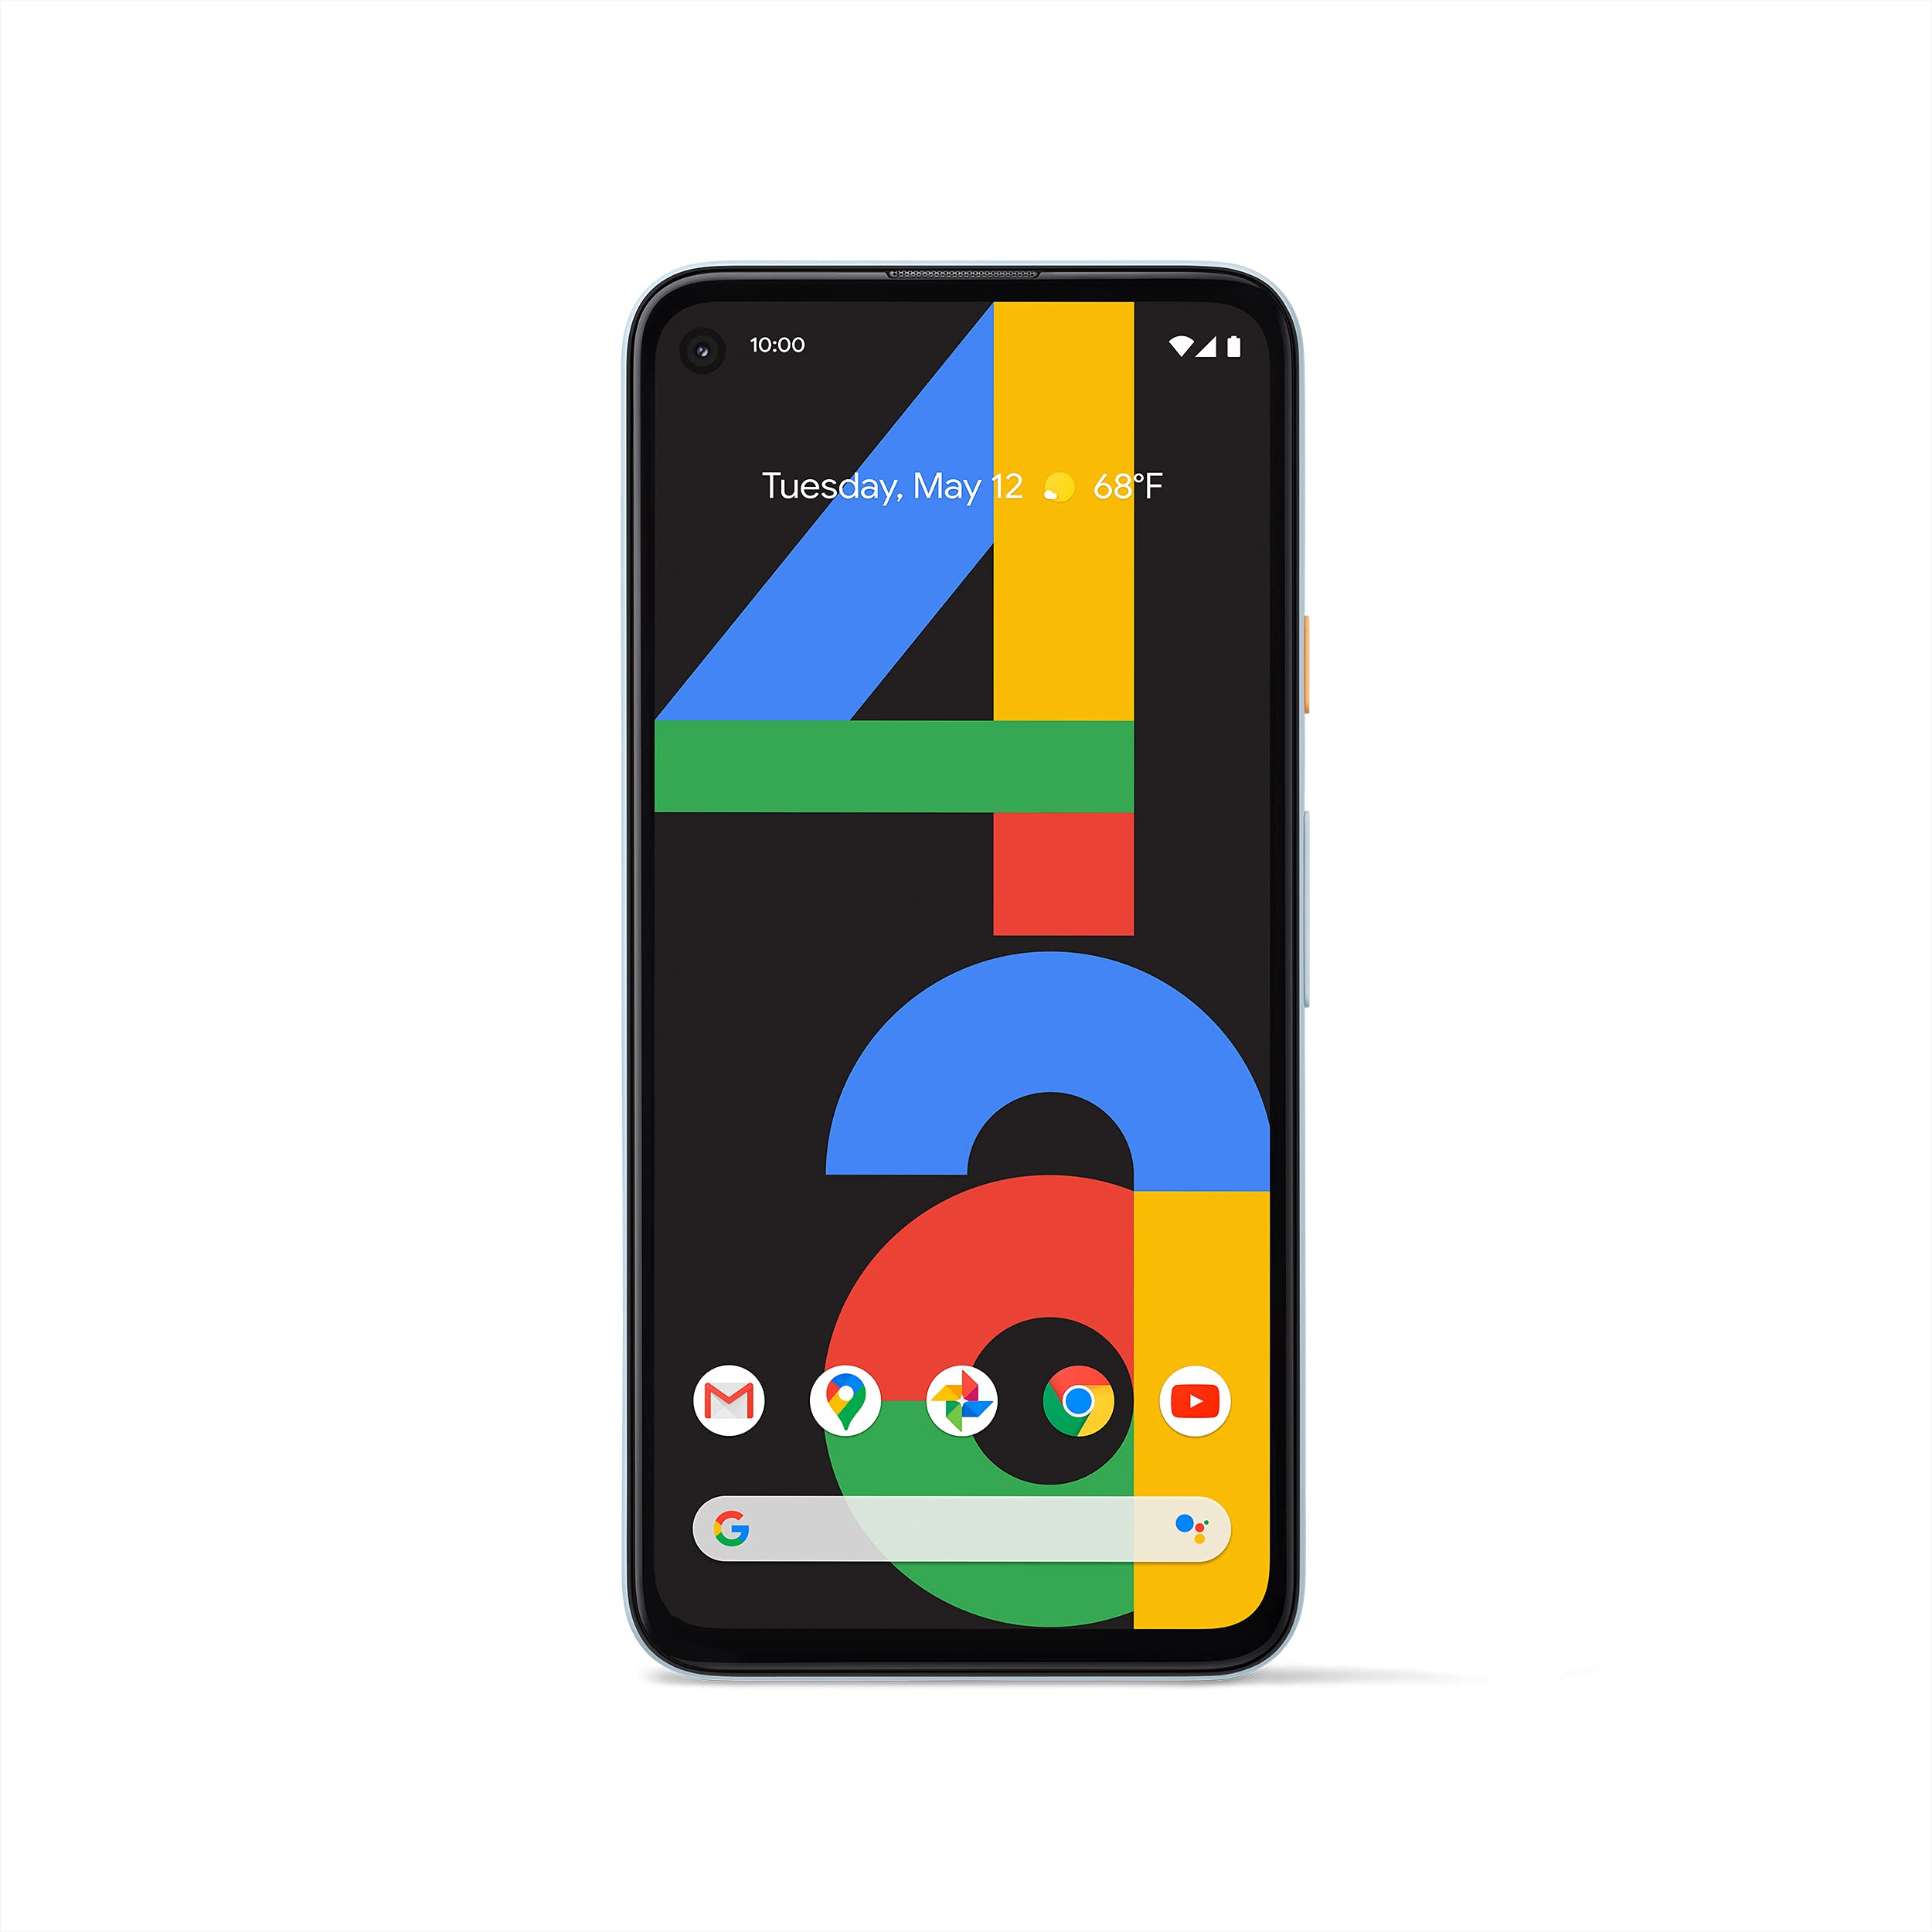 Google Pixel 4a - Unlocked Android Smartphone - 128 GB of Storage - Up to 24 Hour Battery - Barely Blue